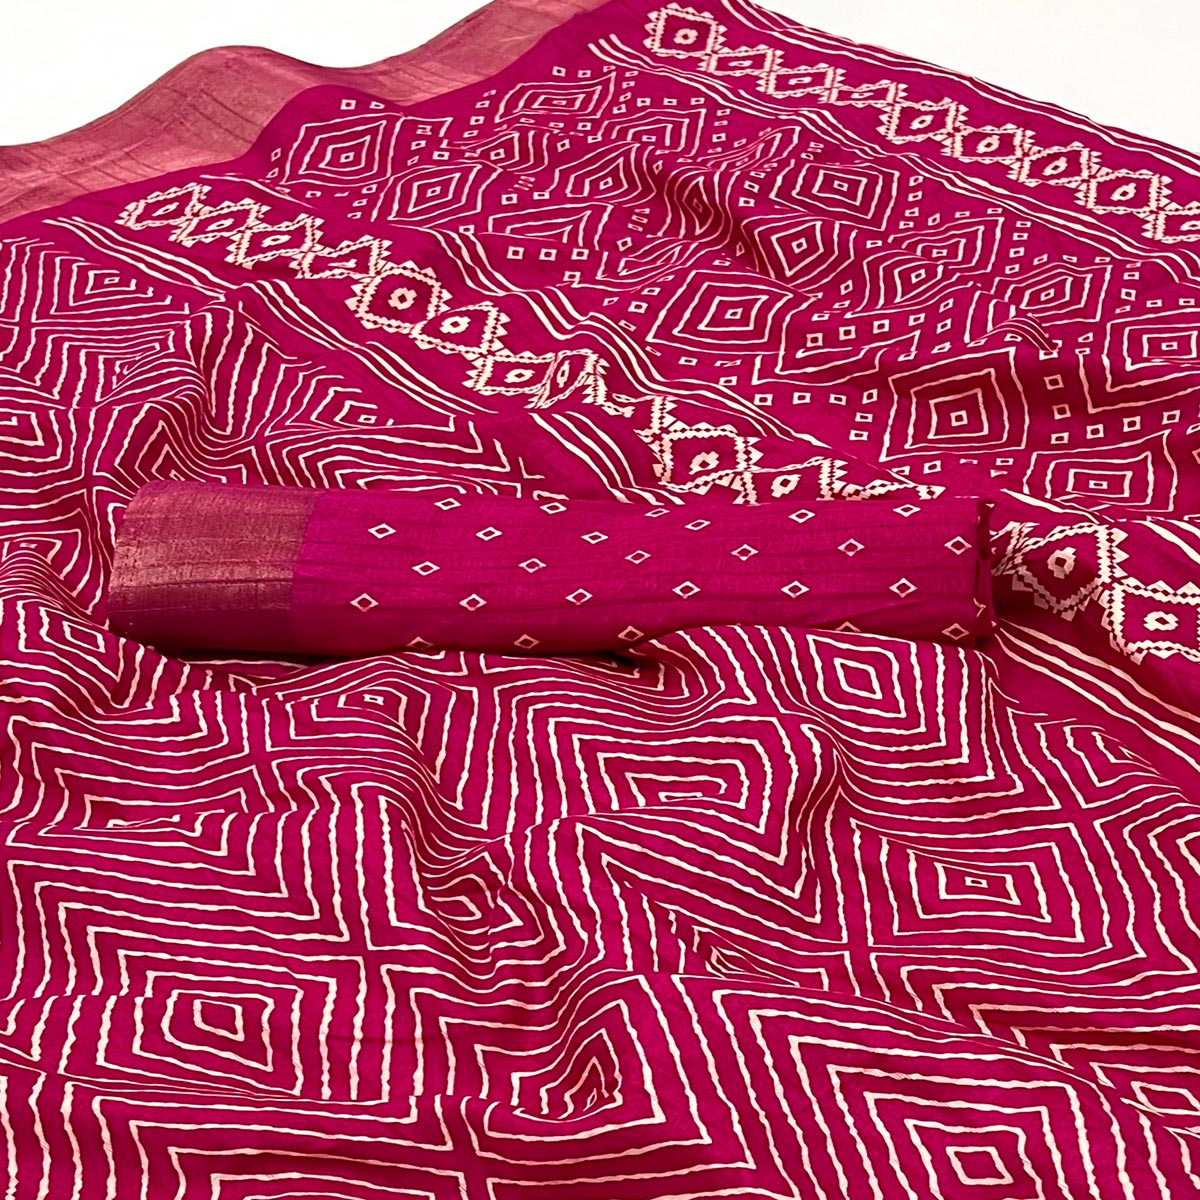 Rani Pink Printed Cotton Blend Saree With Woven Border